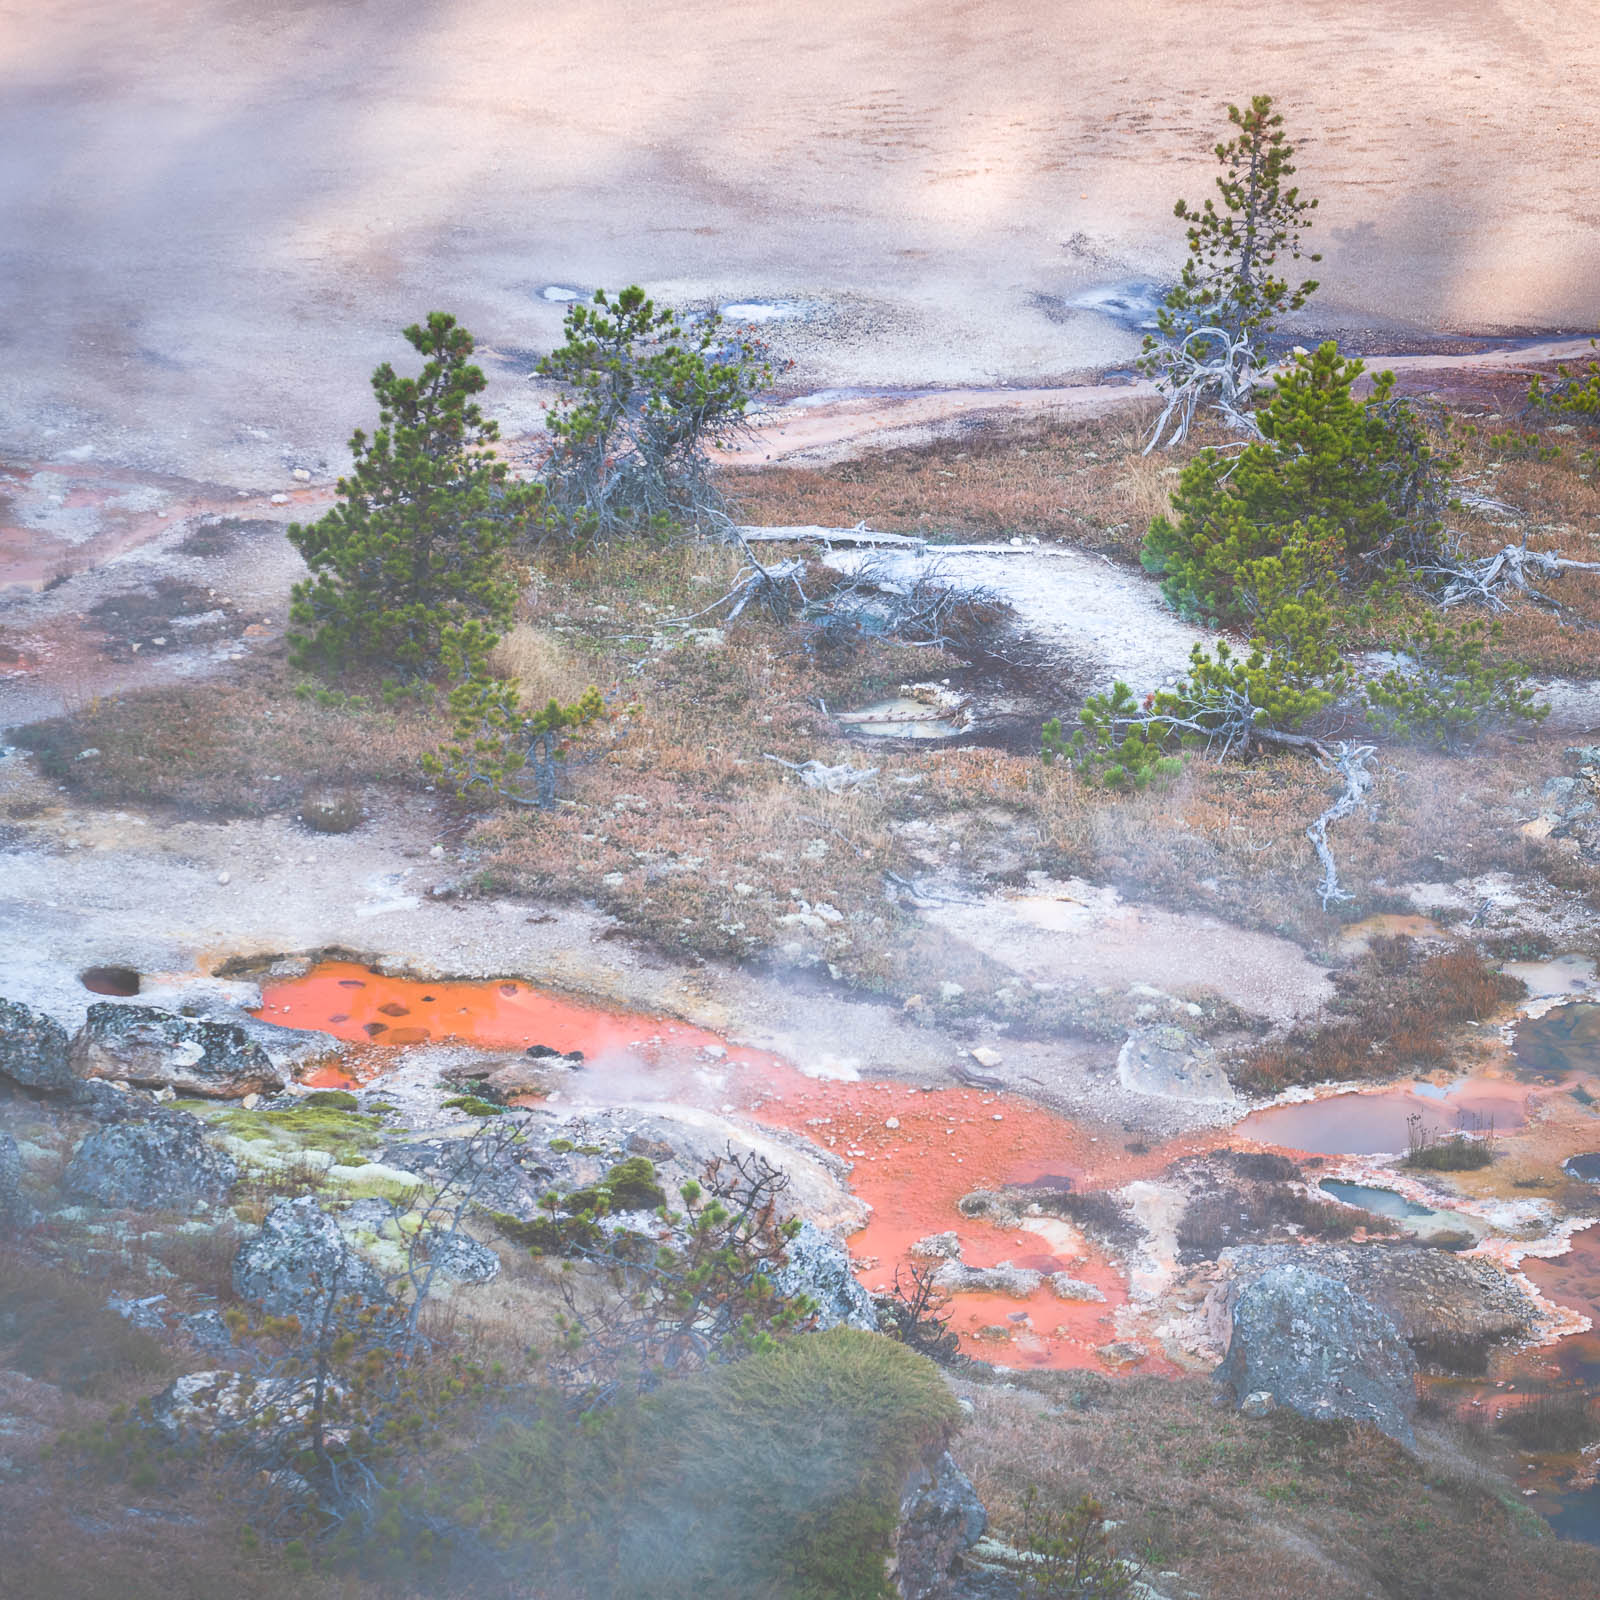 Thermal feature at Artist Paint Pots in Yellowstone National Park